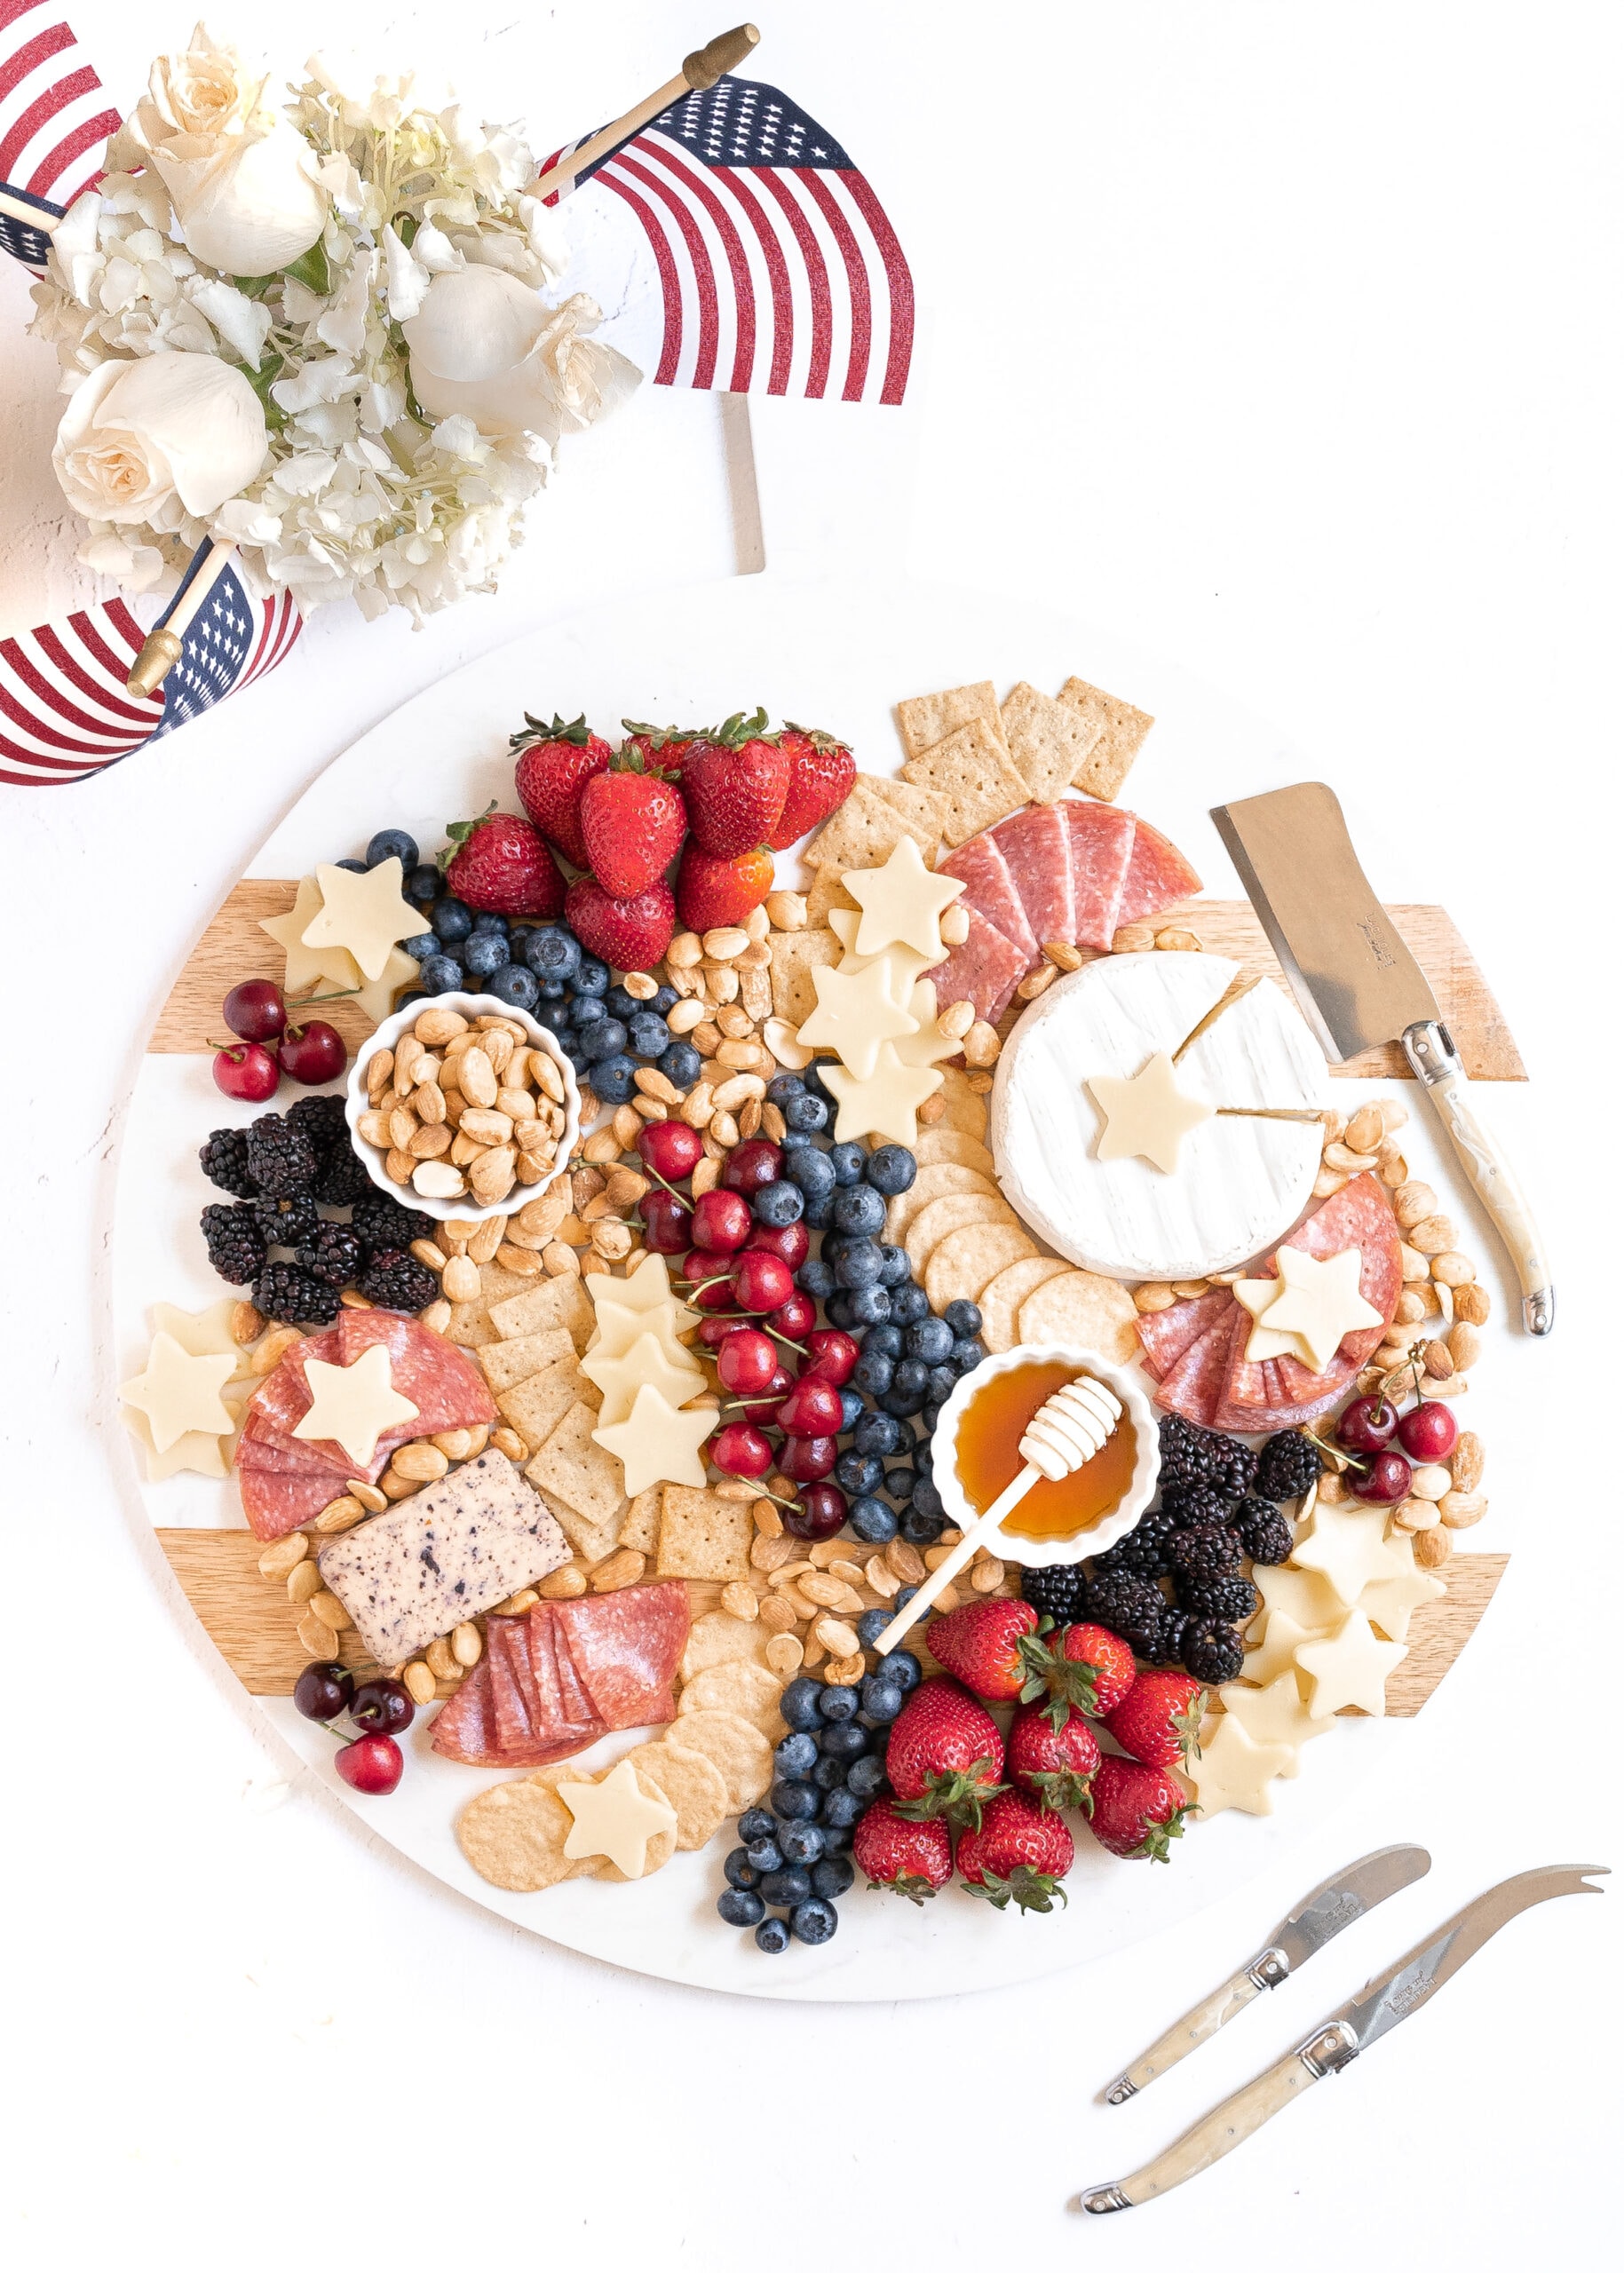 A photo of my patriotic charcuterie board. Made with gluten-free crackers, red and blue fruits, star shaped white cheddar cheese, nuts, and honey.